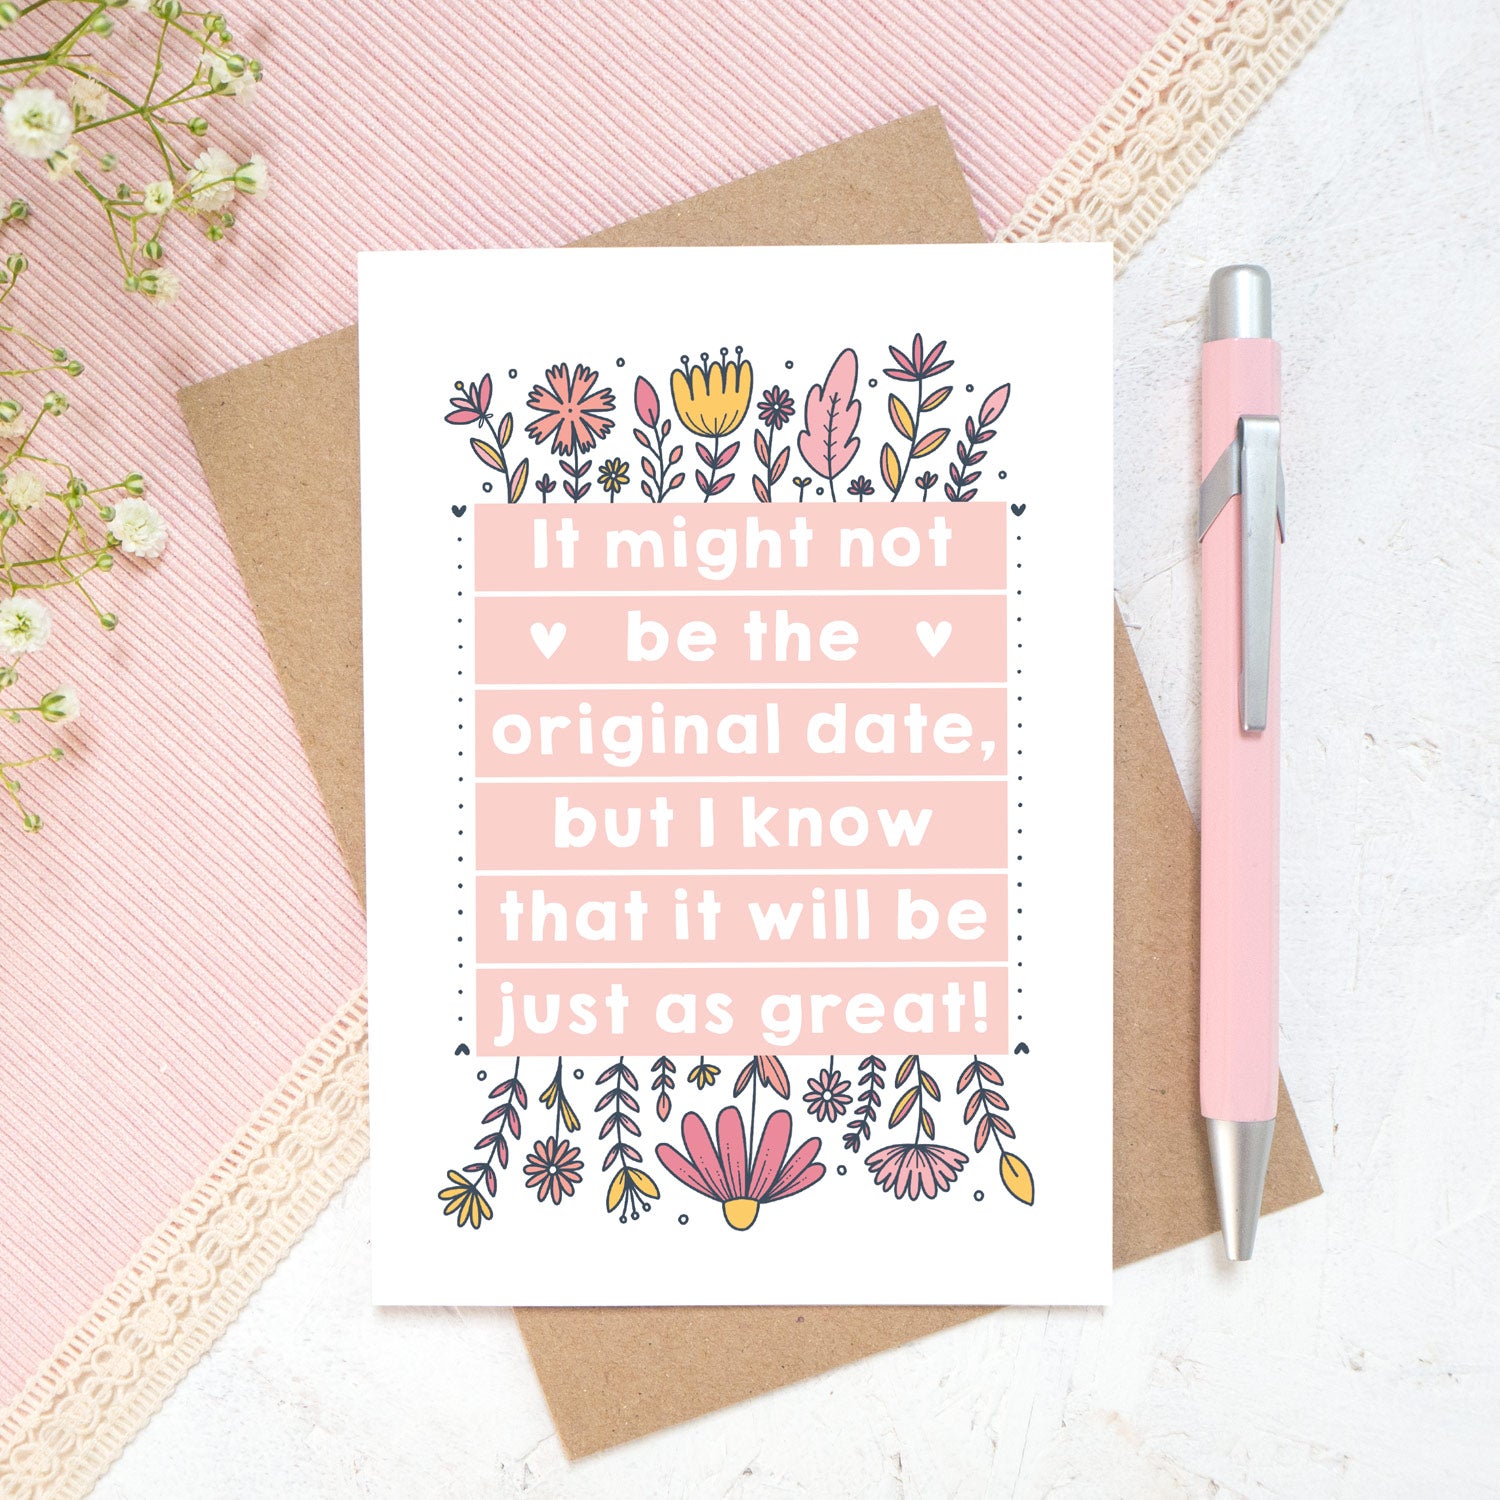 Original wedding date card for wedding postponements or delays. Photographed on a white and pink textured background with a pink pen and hint of foliage. The card features pink block of text and hand drawn florals.